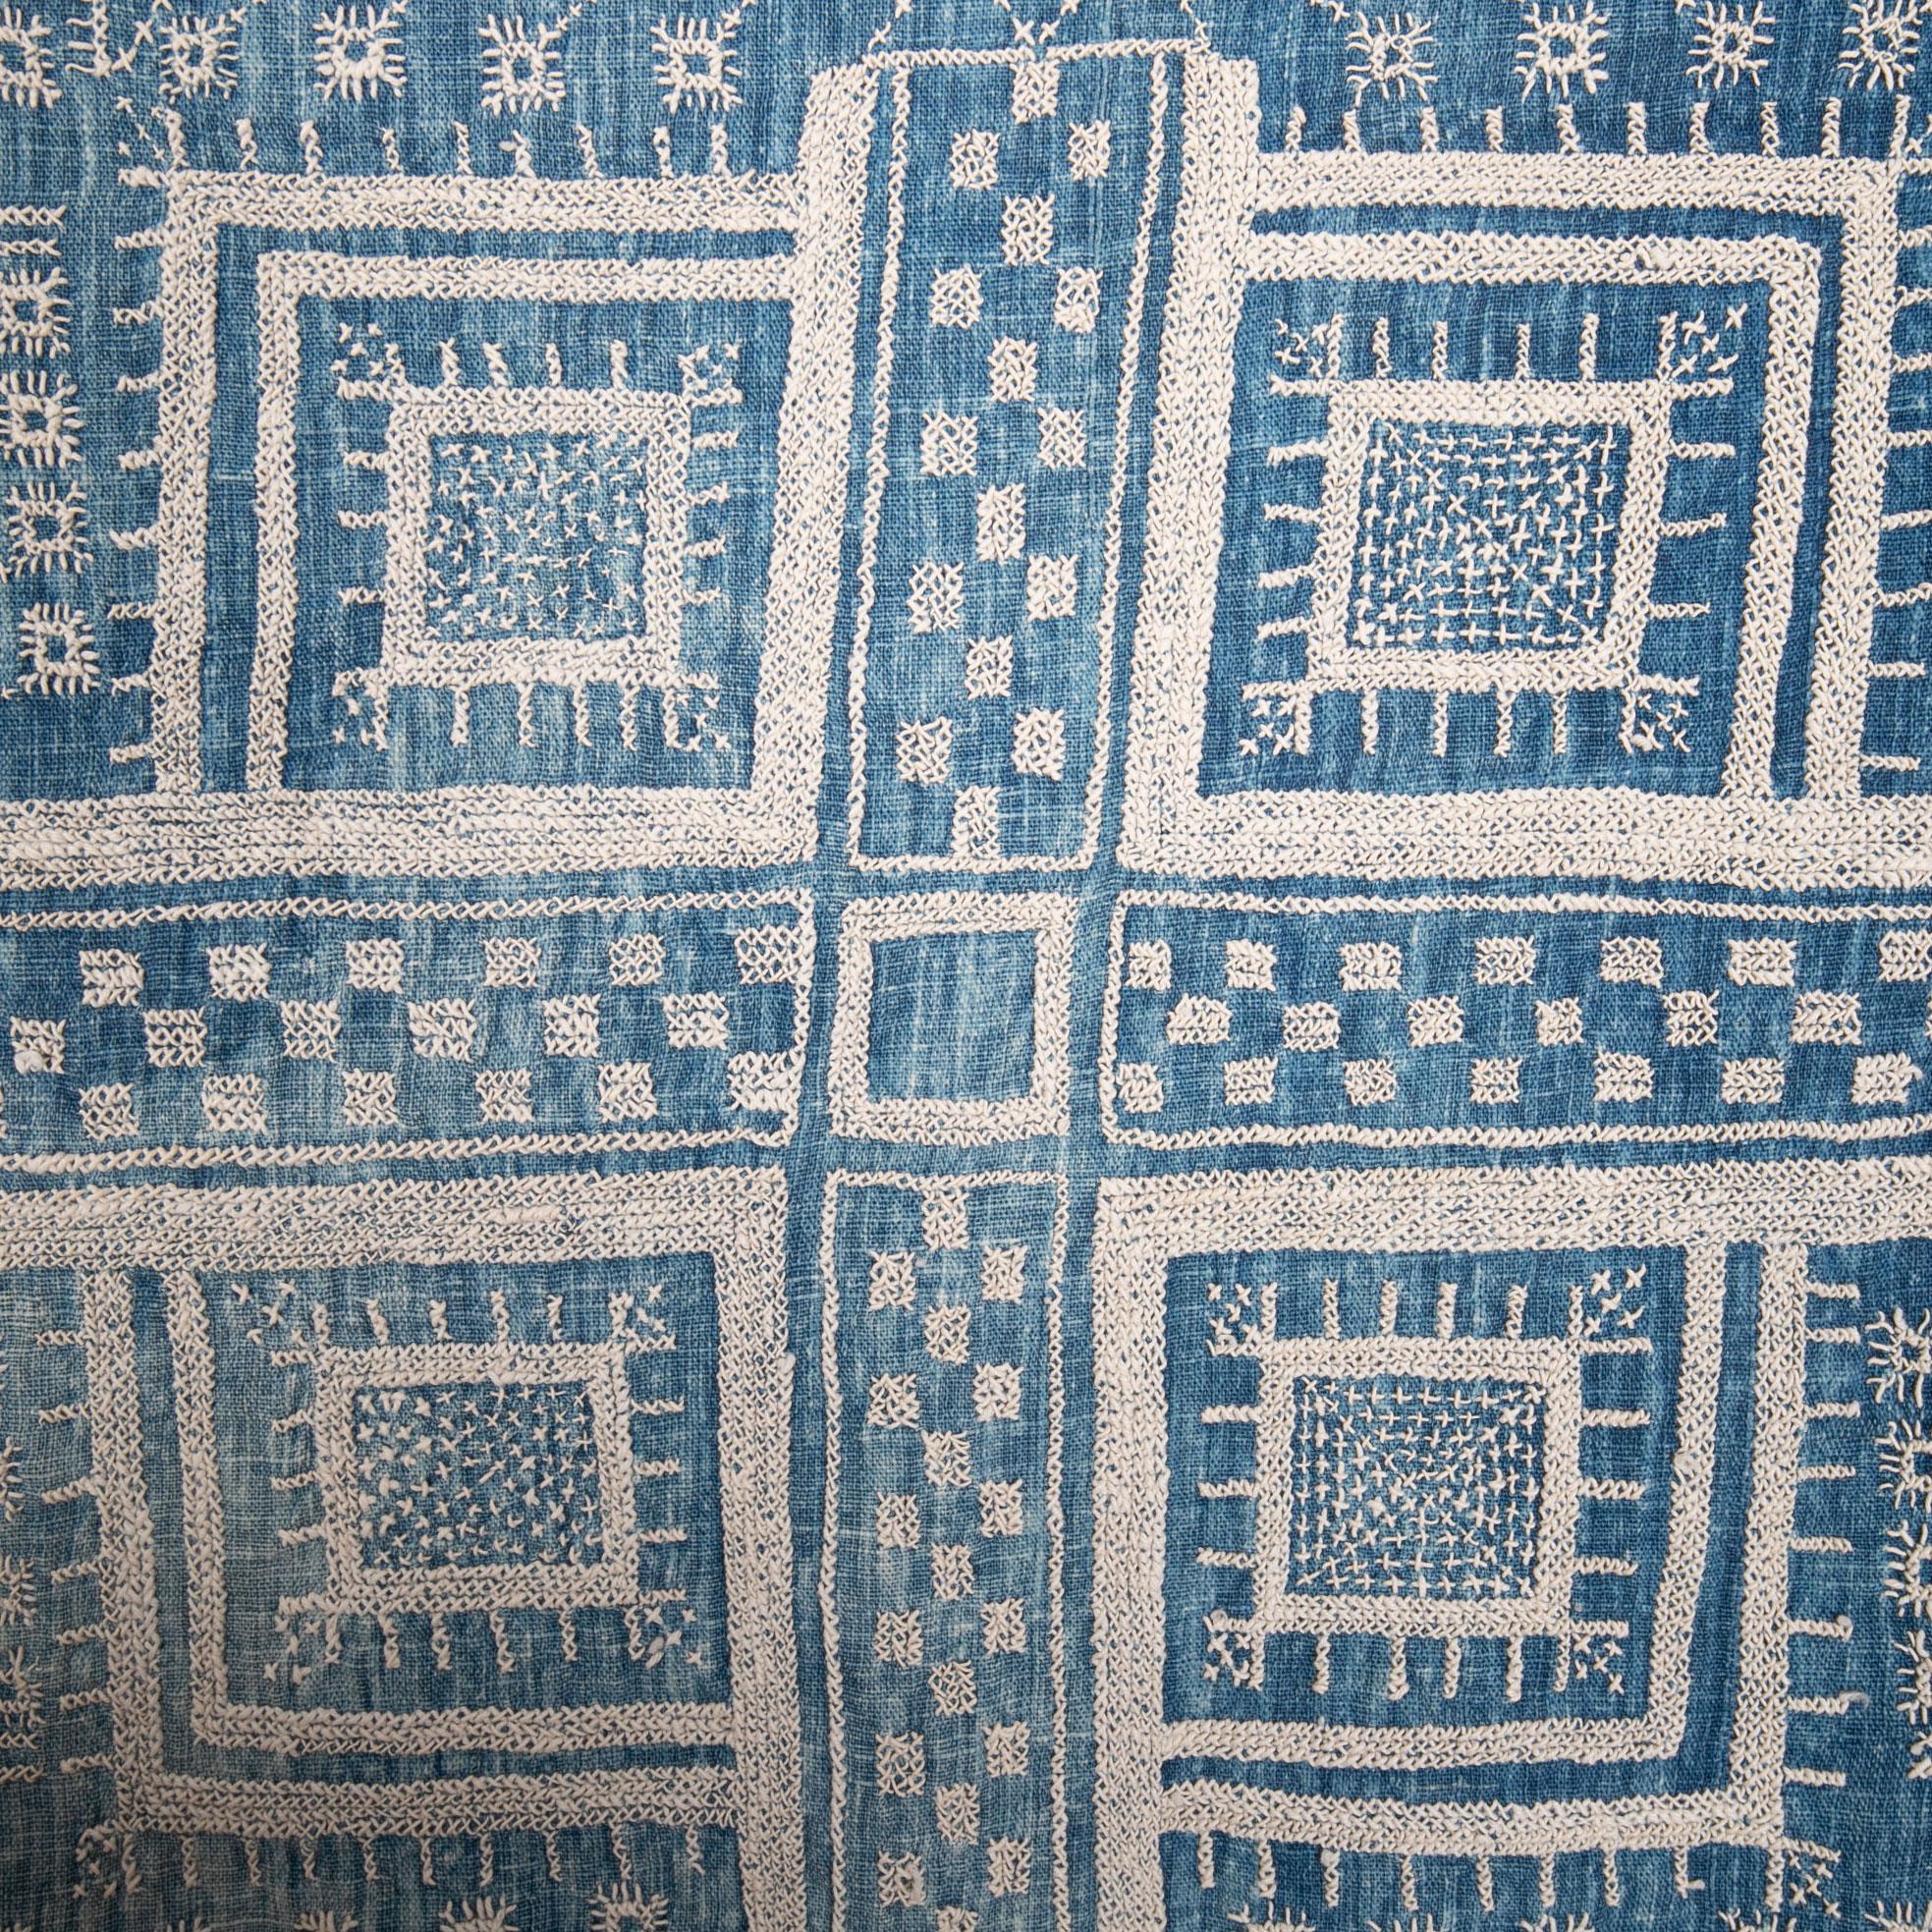 Antique Indigo Embroidered Shawl from Gujarat, India, Early 20th Century 3